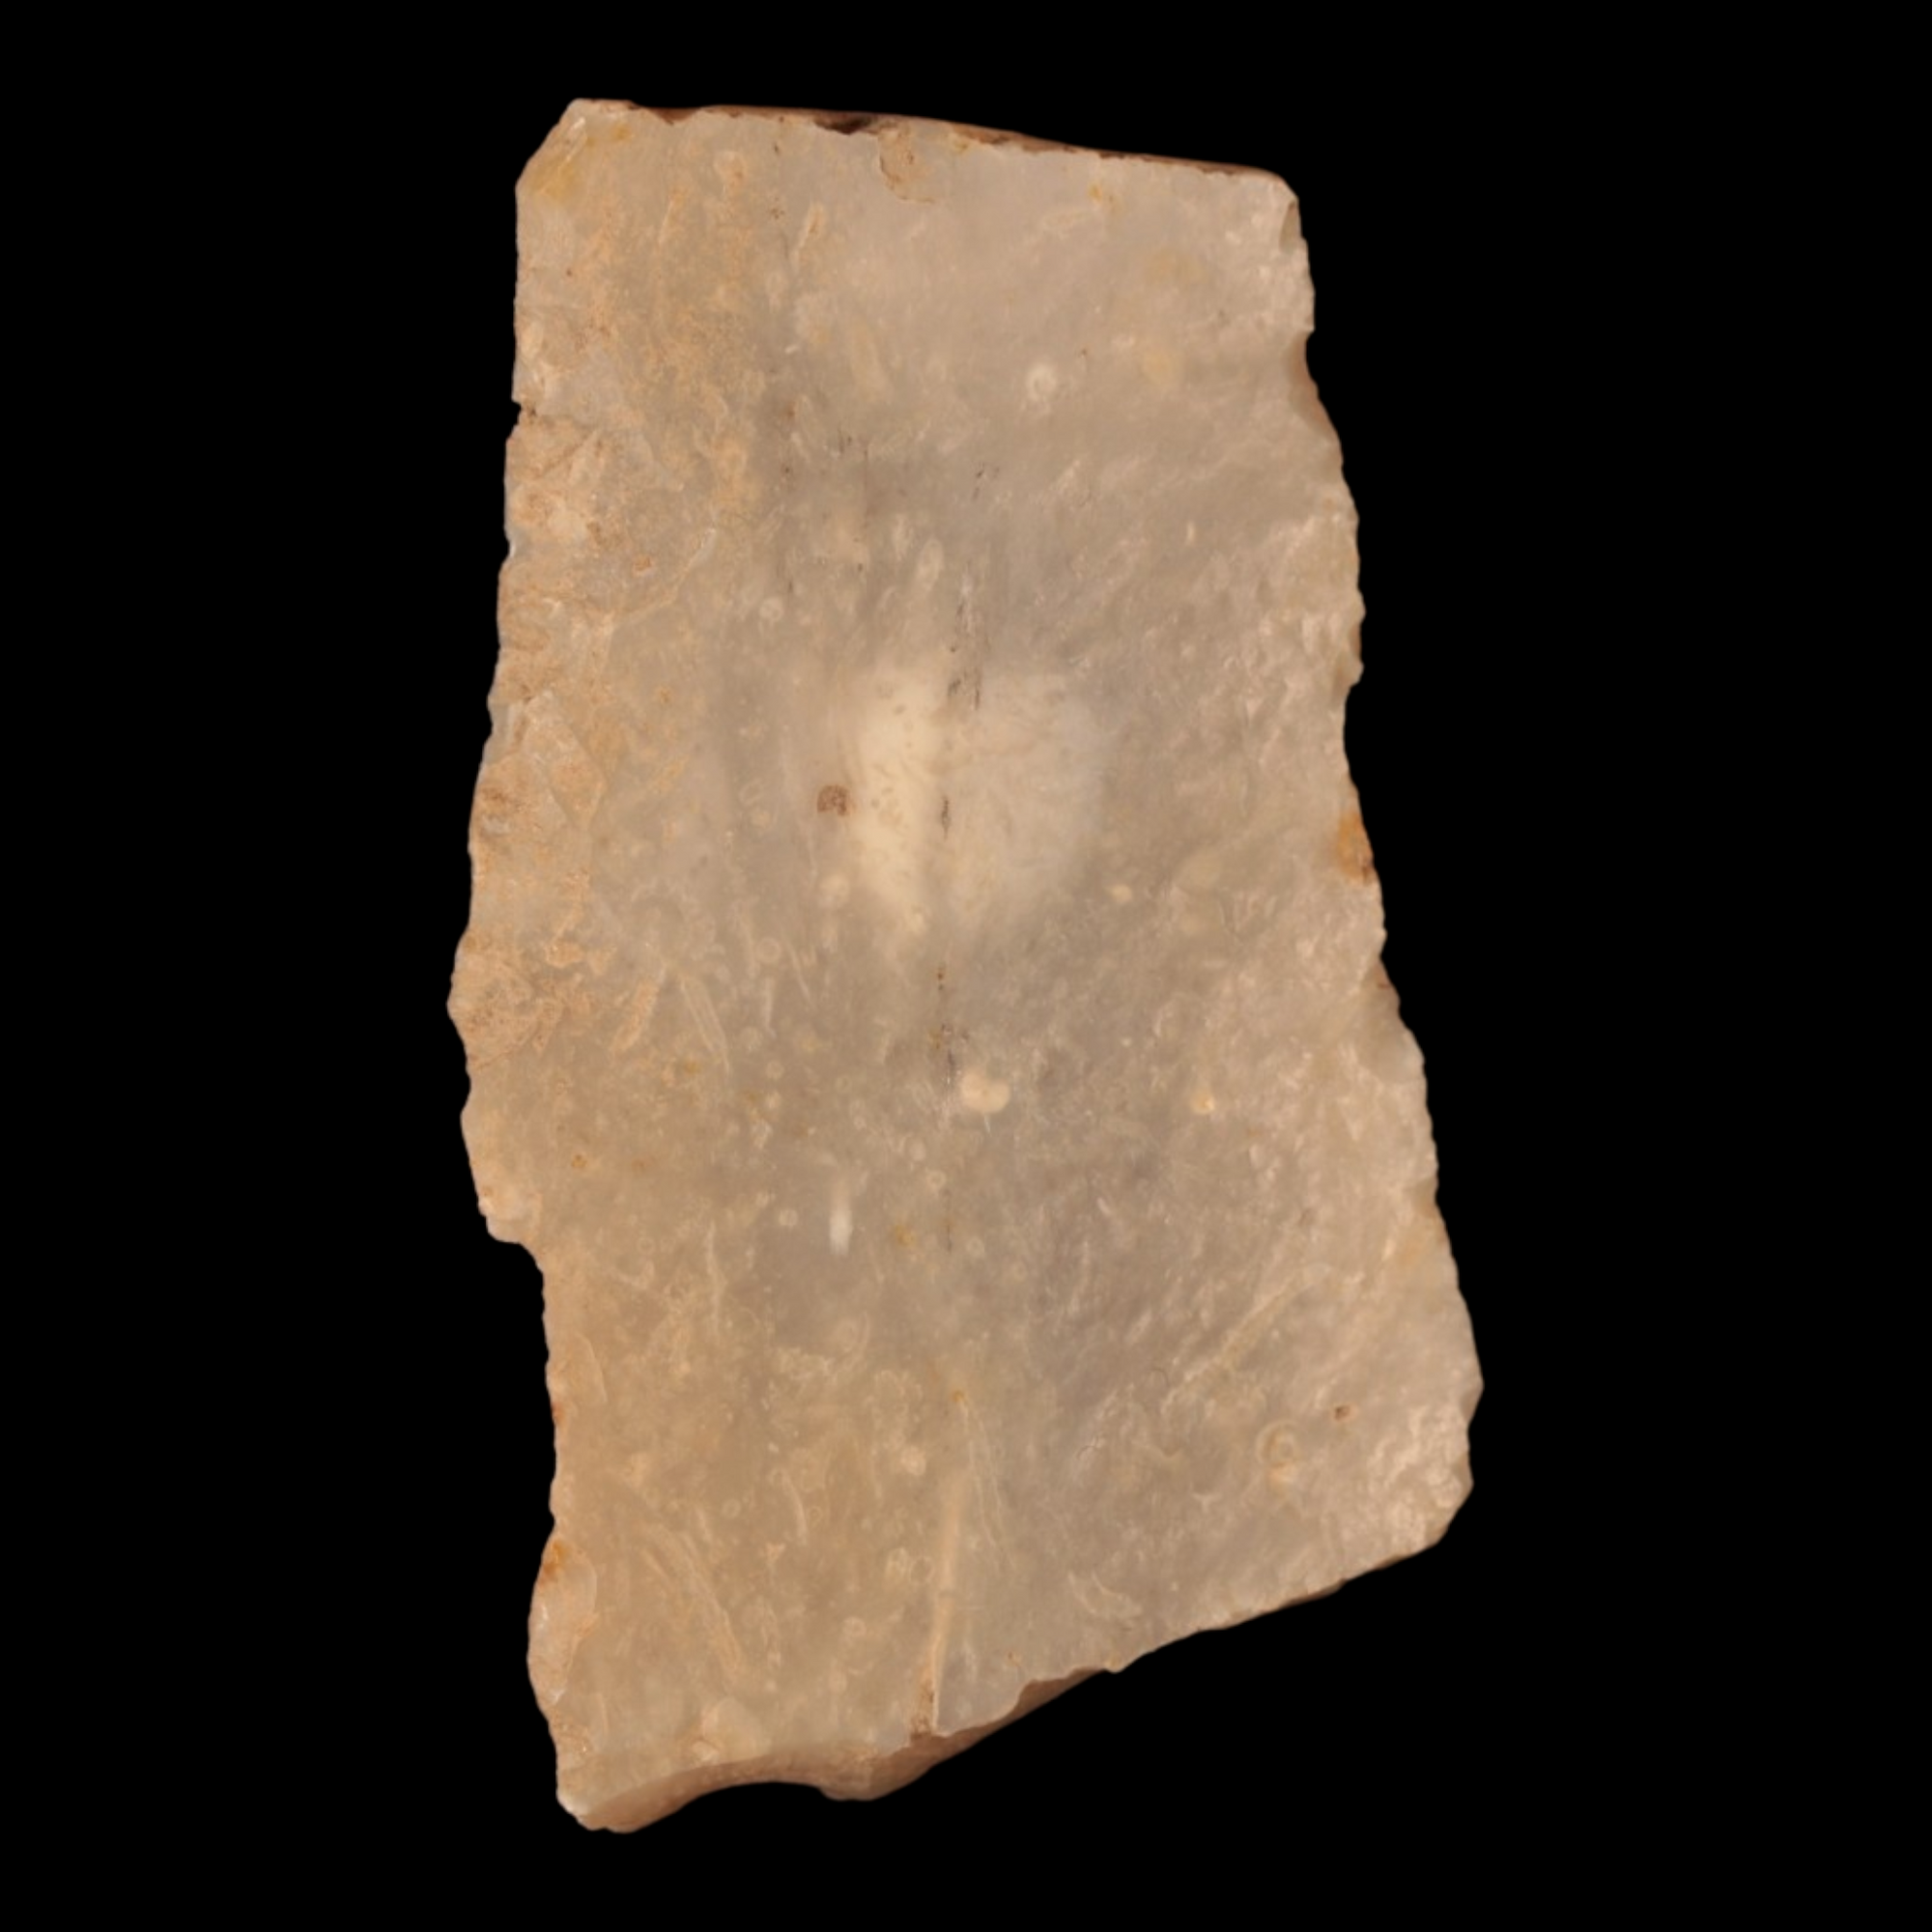 Danish Mesolithic Stone Tool #6 (1.9 inches) - c. 9000 to 5000 BCE - Denmark - 7/12/23 Auction